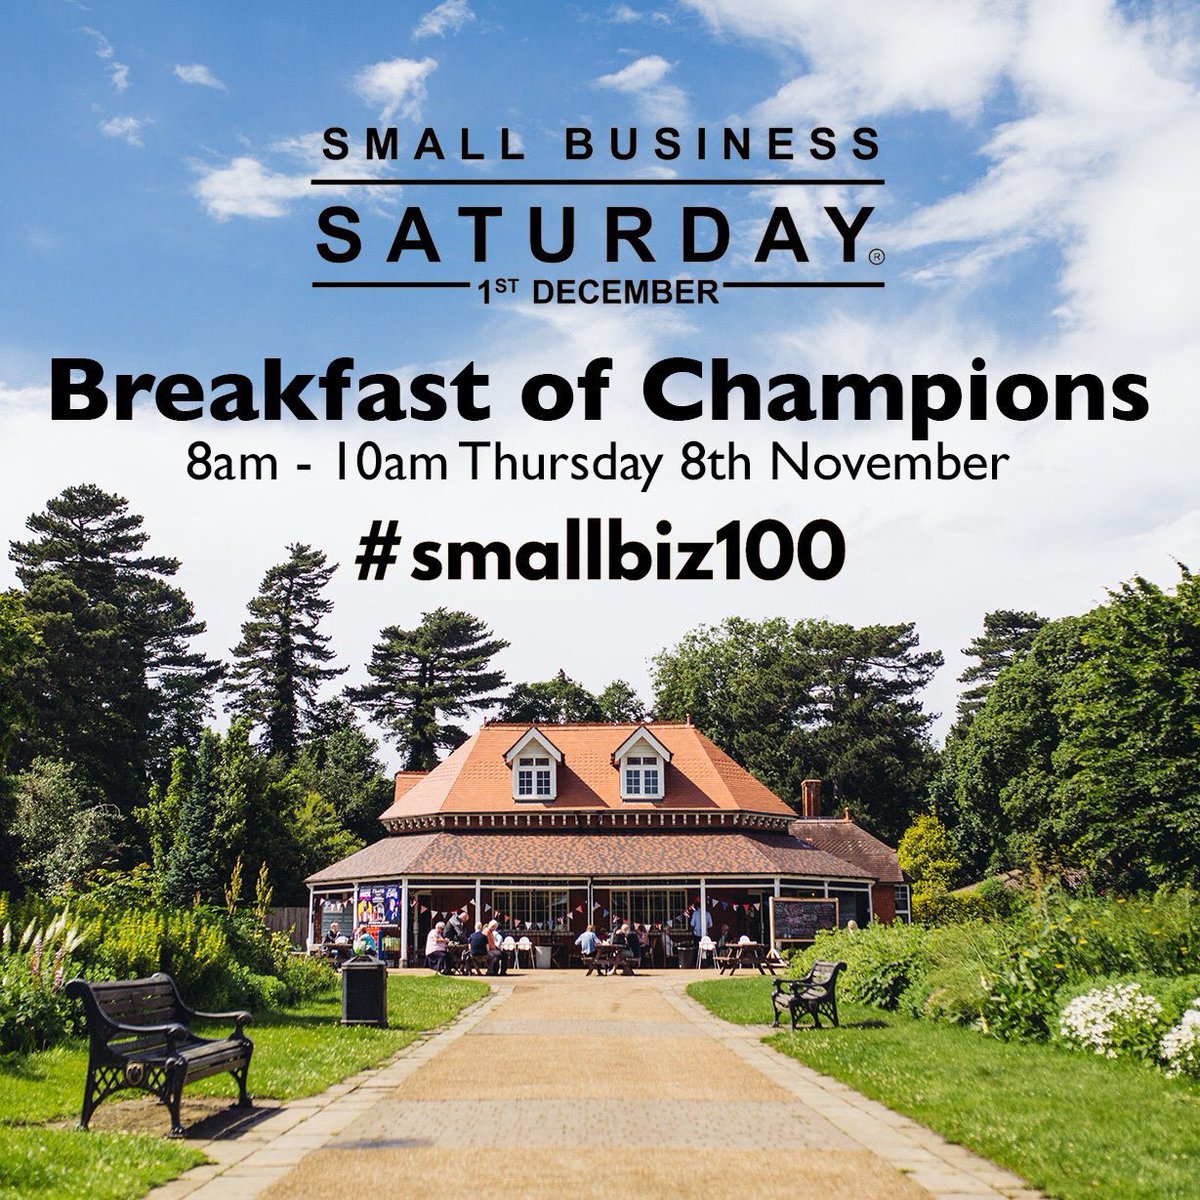 Today is the day #BreakfastwithChampions celebrating @BedfordPavilion inclusion in #smallbiz100. Plus @BedfordExplore & @bedfordindy on digital media & how small businesses can shout about what they do. @SmallBizSatUK